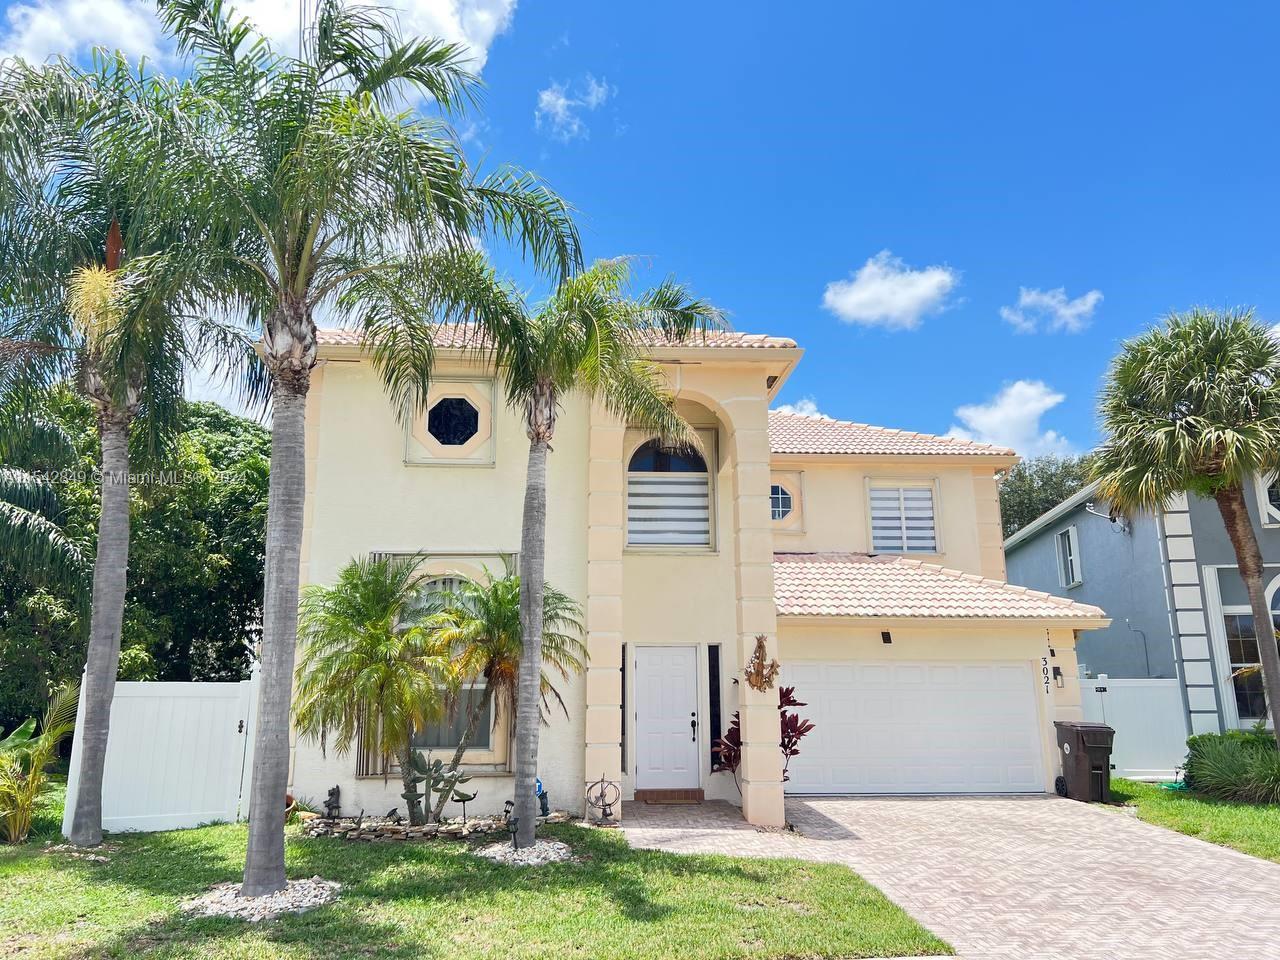 Property for Sale at 3021 El Camino Real, West Palm Beach, Palm Beach County, Florida - Bedrooms: 5 
Bathrooms: 4  - $683,200